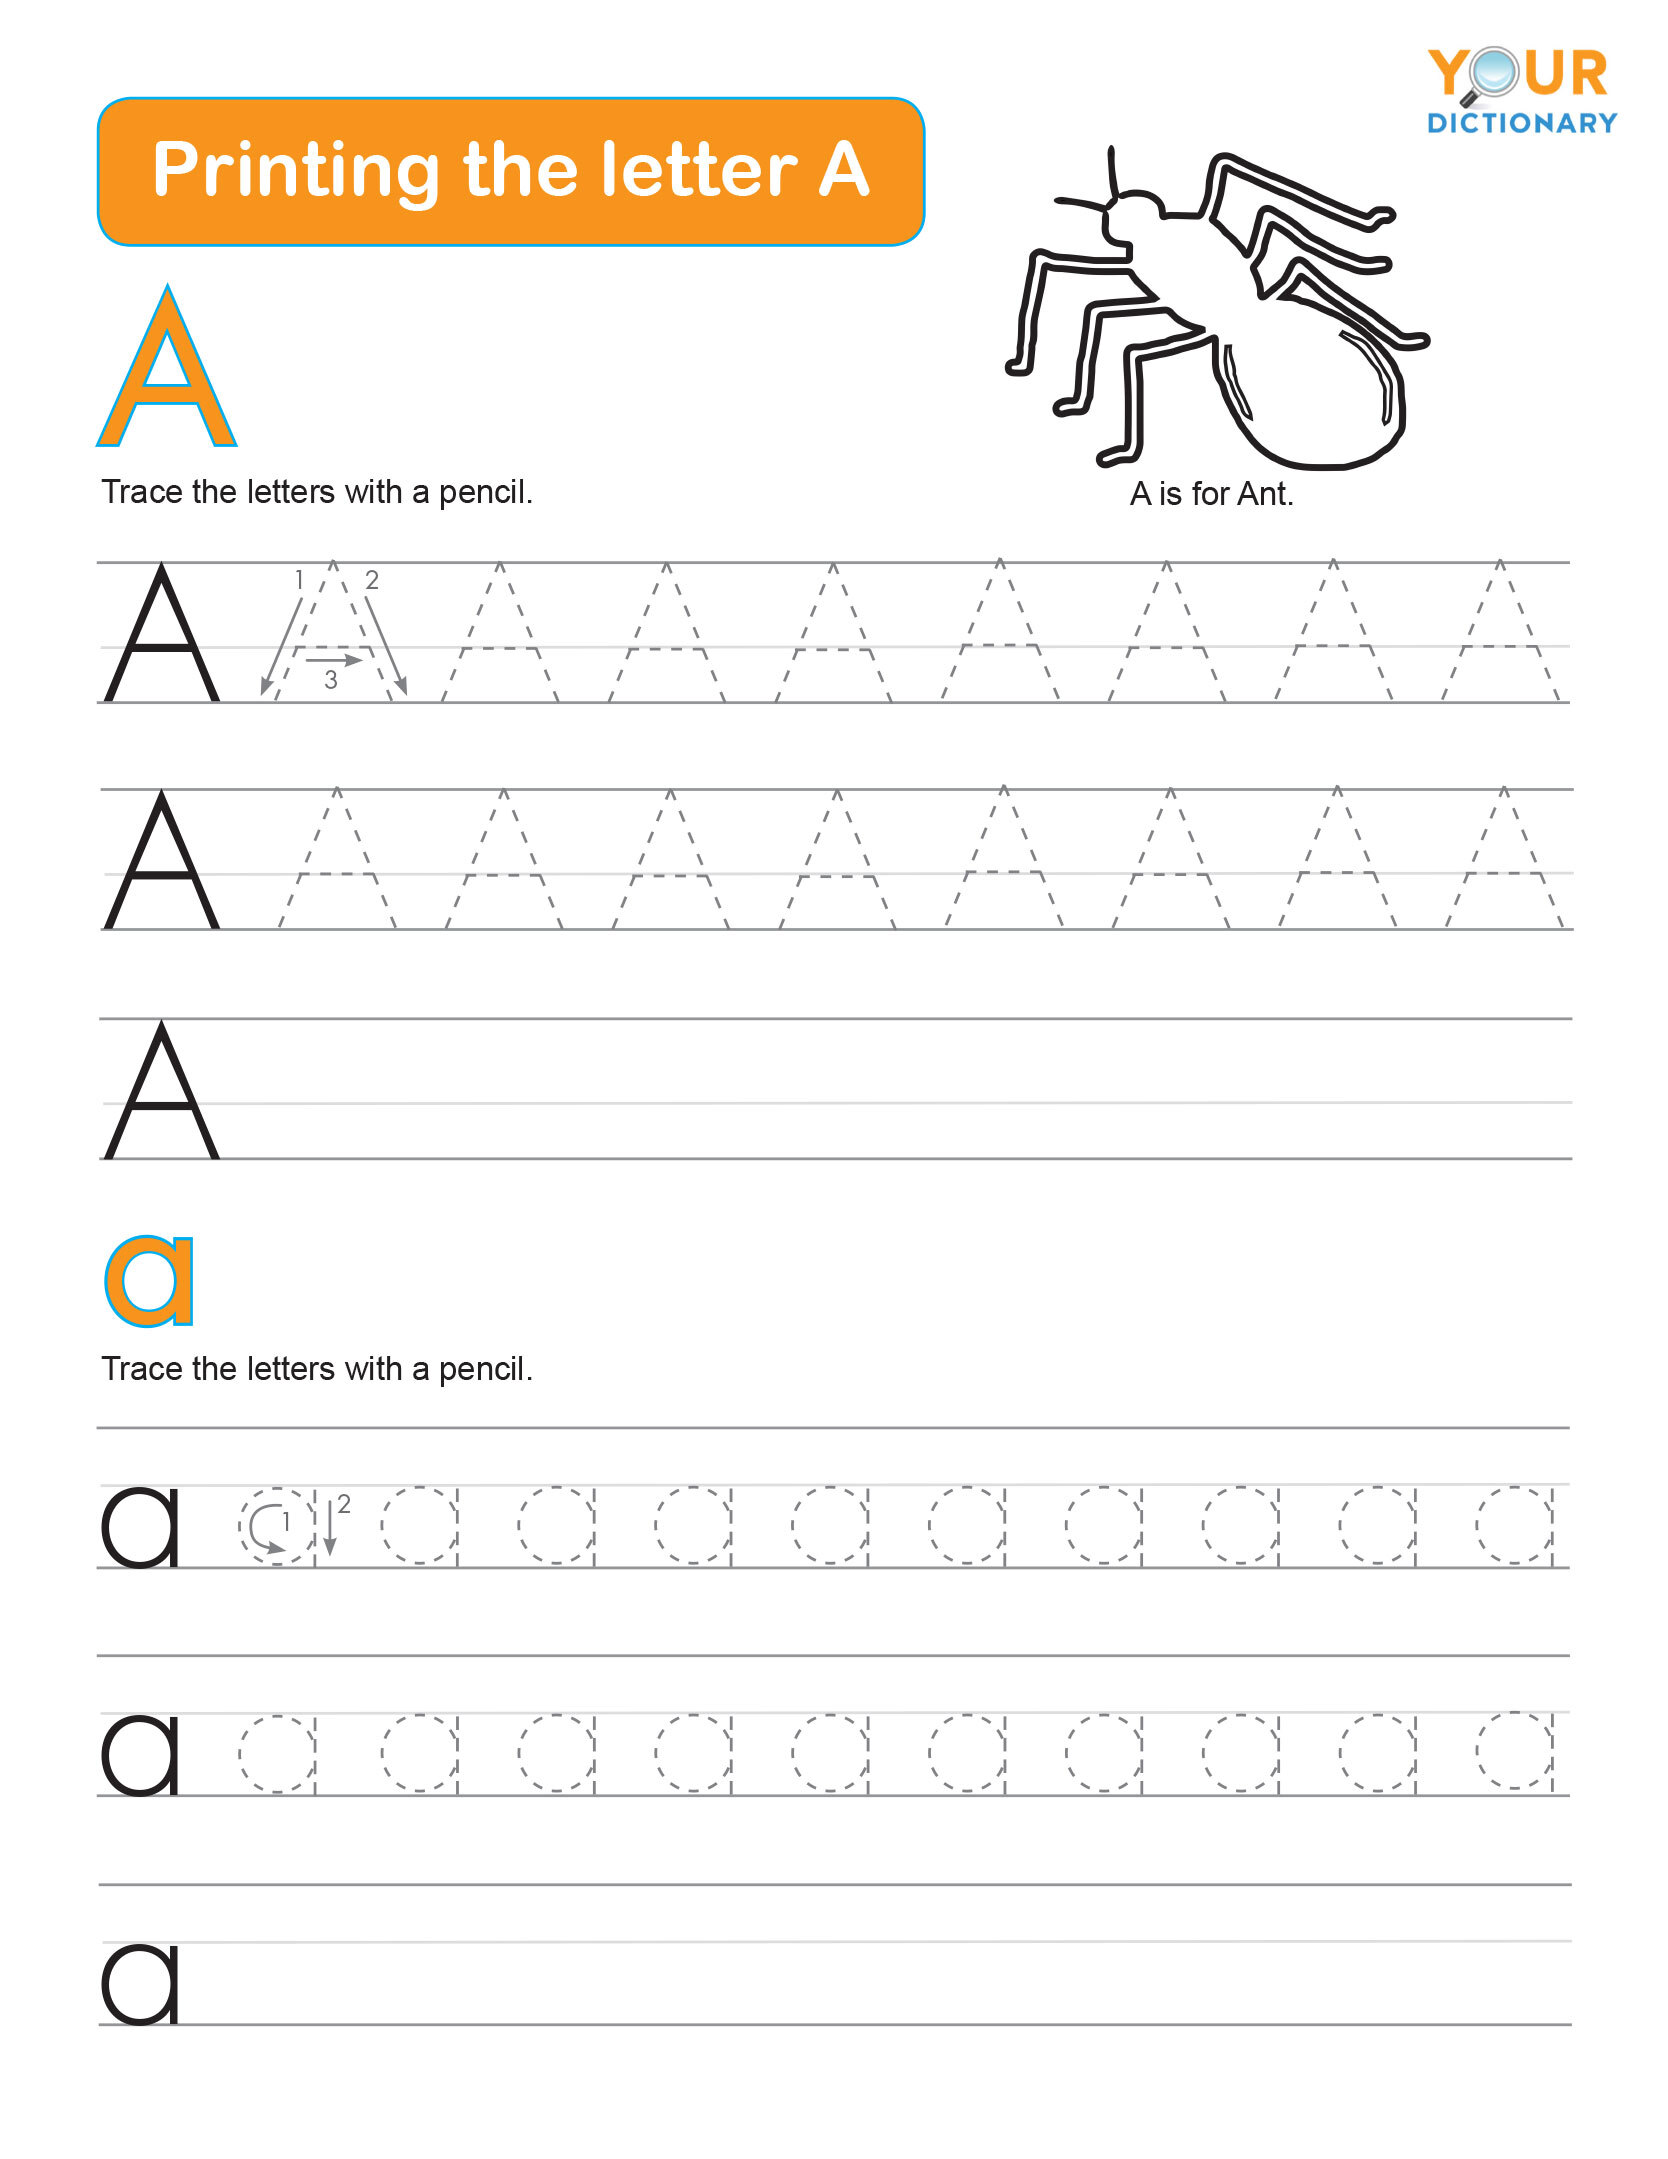 Letter Tracing Worksheets Free Printables & Tips to Make It Fun